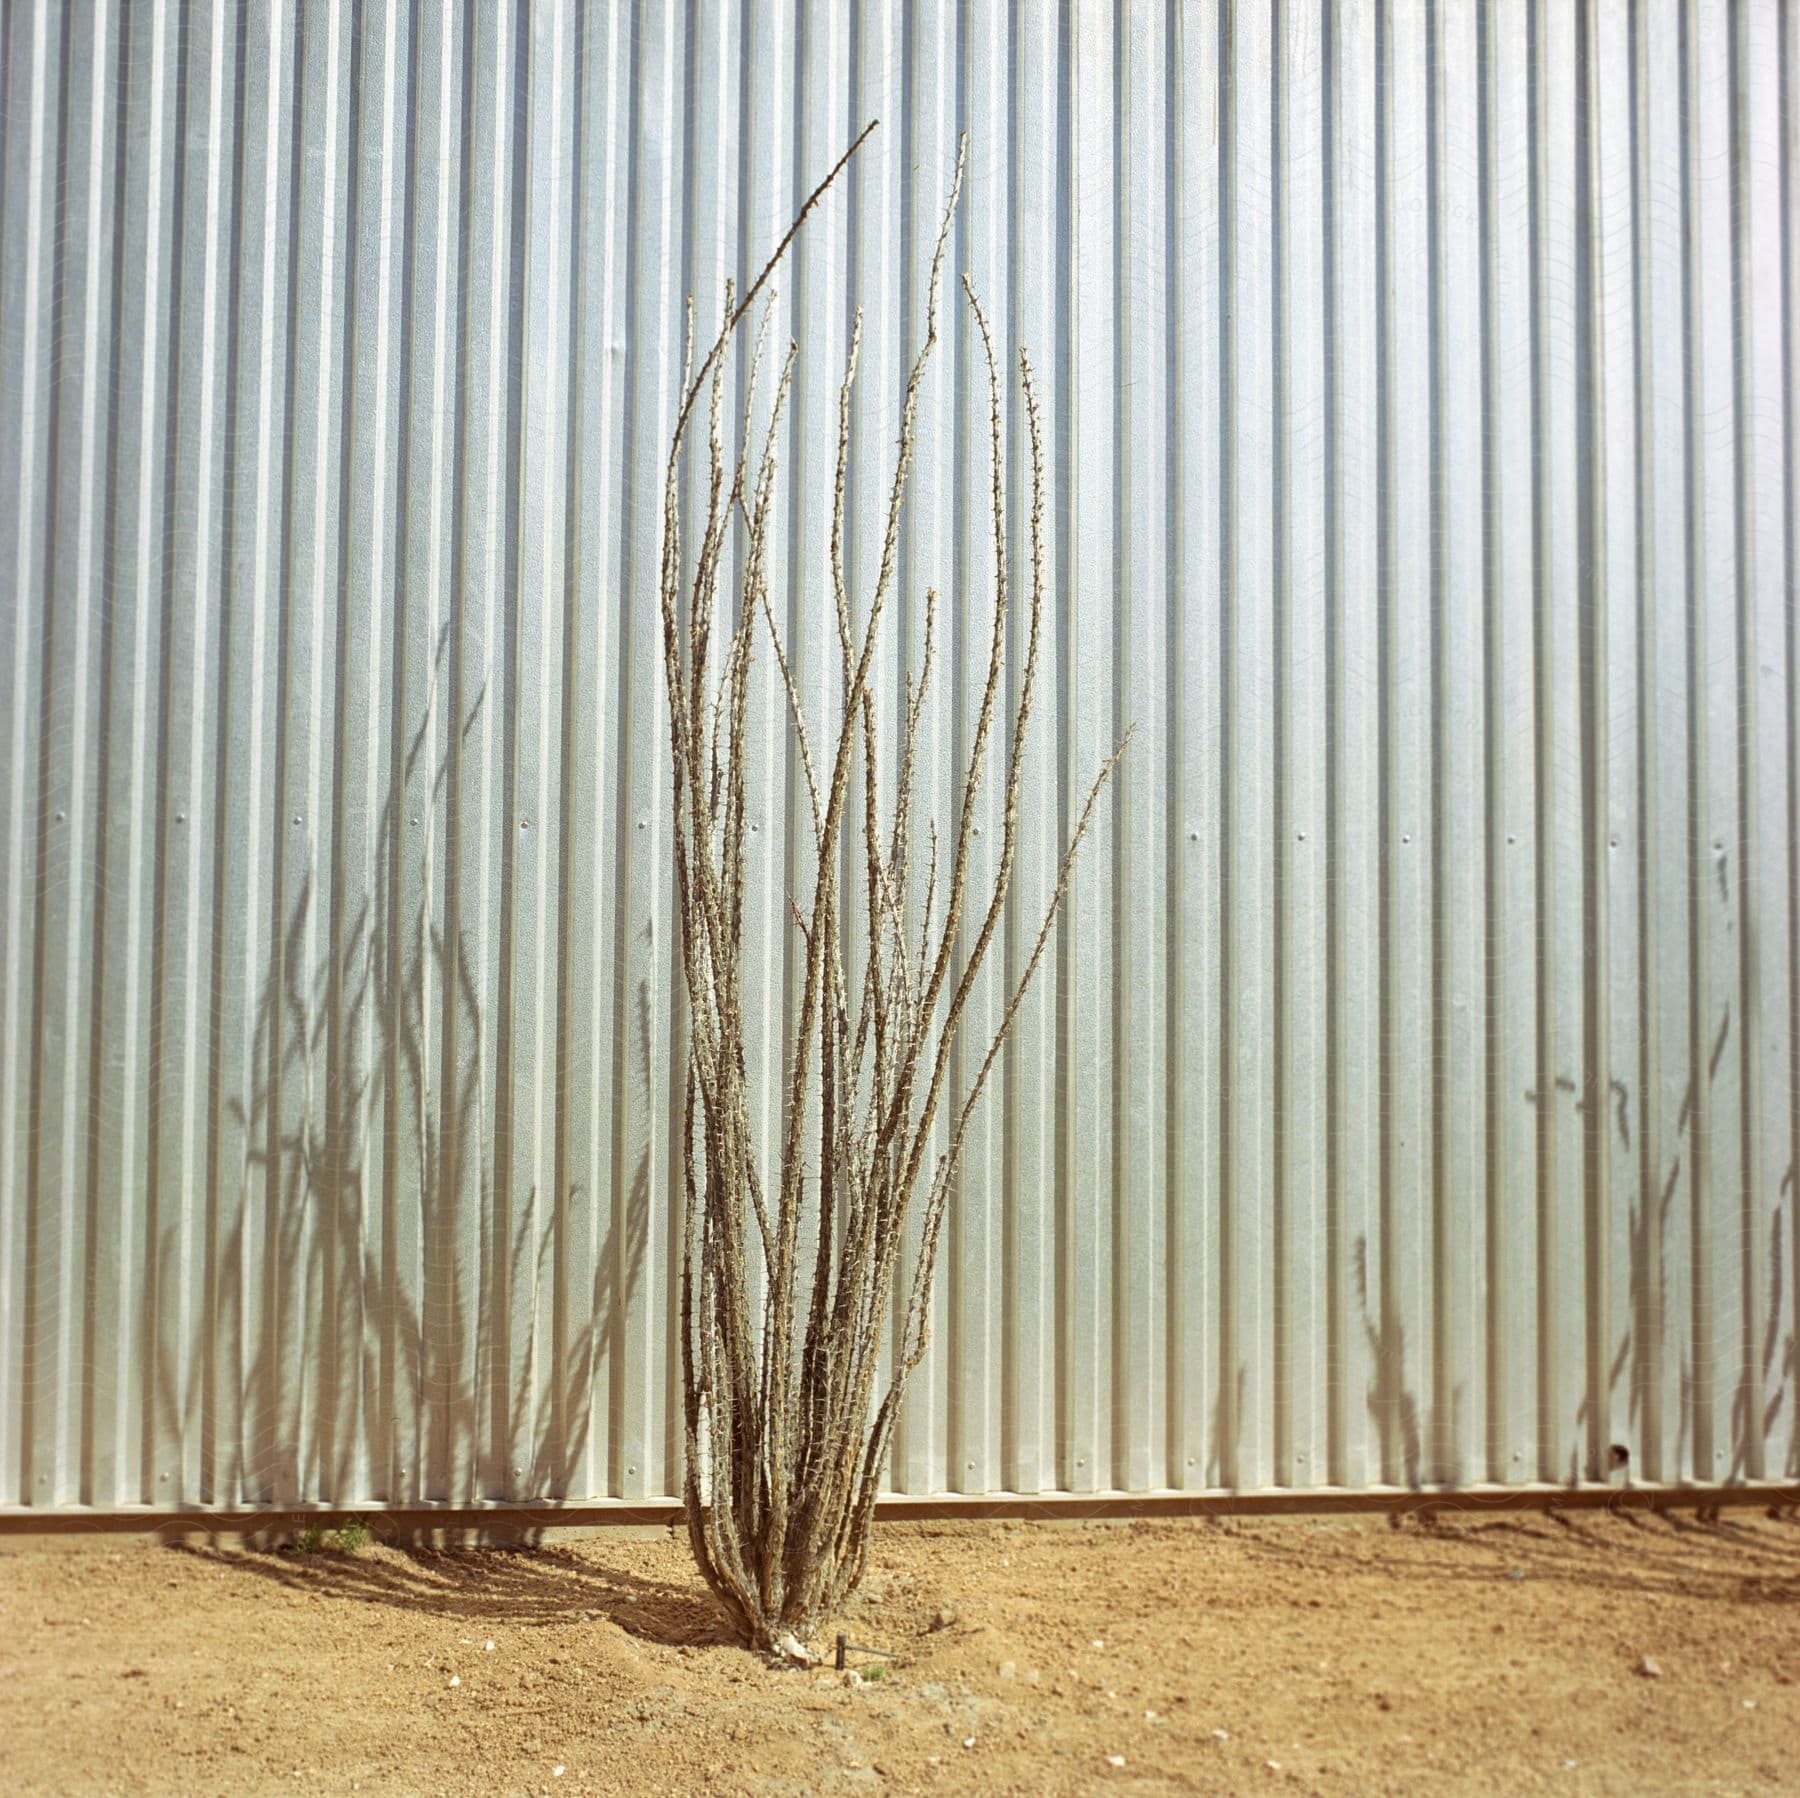 A sandy land with a single dry plant close to a fence